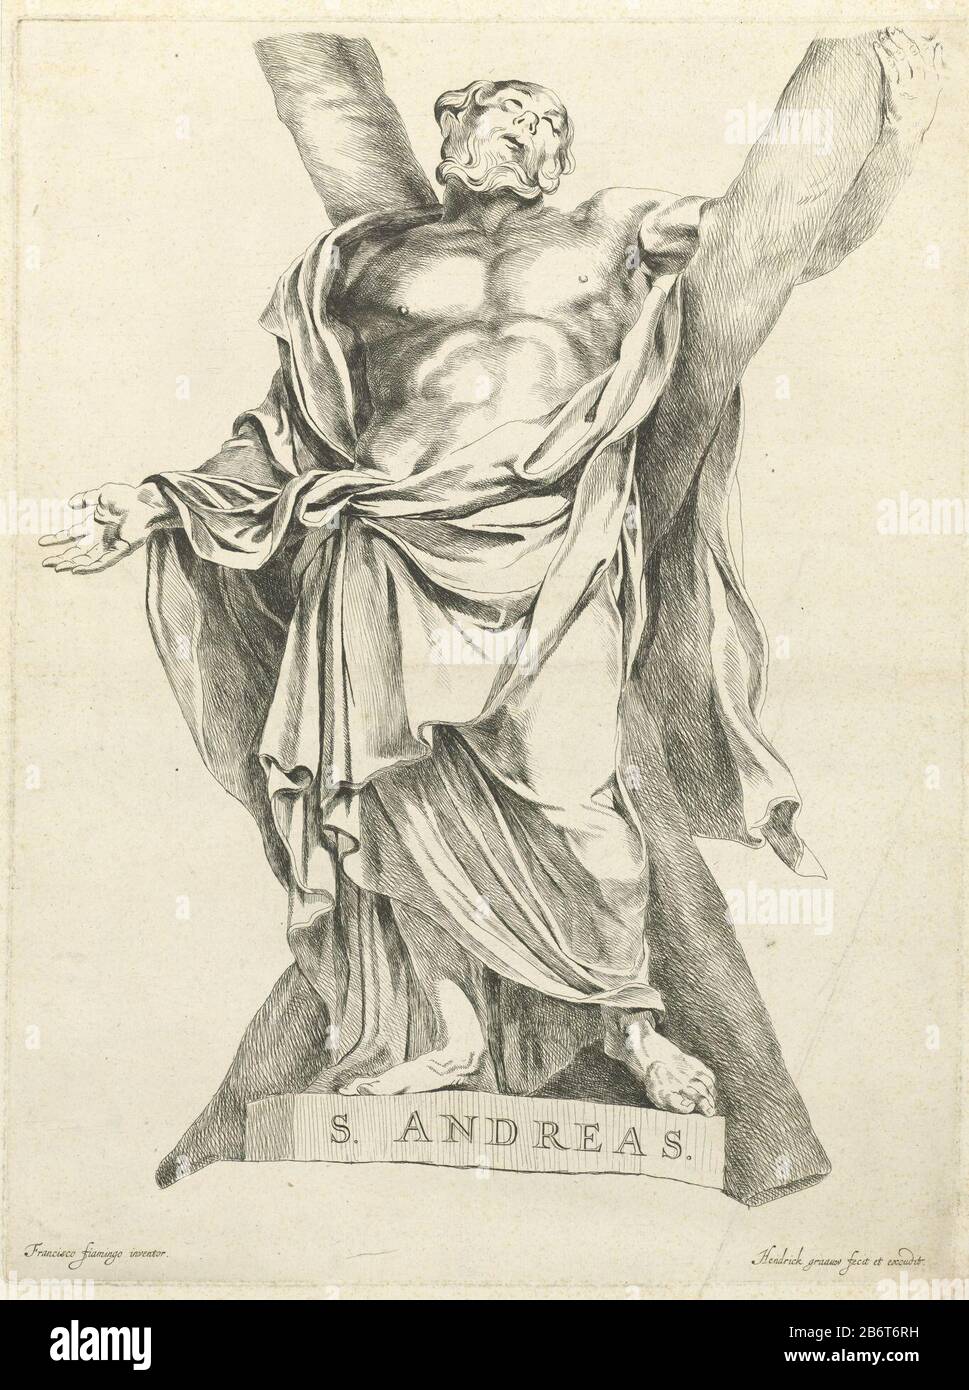 Heilige Andreas Saint Andrew, with x- shaped cross. The statue of François Duquesnoy. Manufacturer : printmaker: Hendrick de Graauw (listed building) to view: François Du Quesnoy (listed building) Publisher: Hendrick de Graauw (listed property) Date: ca. 1637 - 1693 Physical features: etching material: paper Technique: etching dimensions: plate edge b 312 mm x h 413 mm Subject: the apostle Andrew; possible attributes: book, X-shaped cross, fish, fishing net, rope, scroll right and Stock Photo